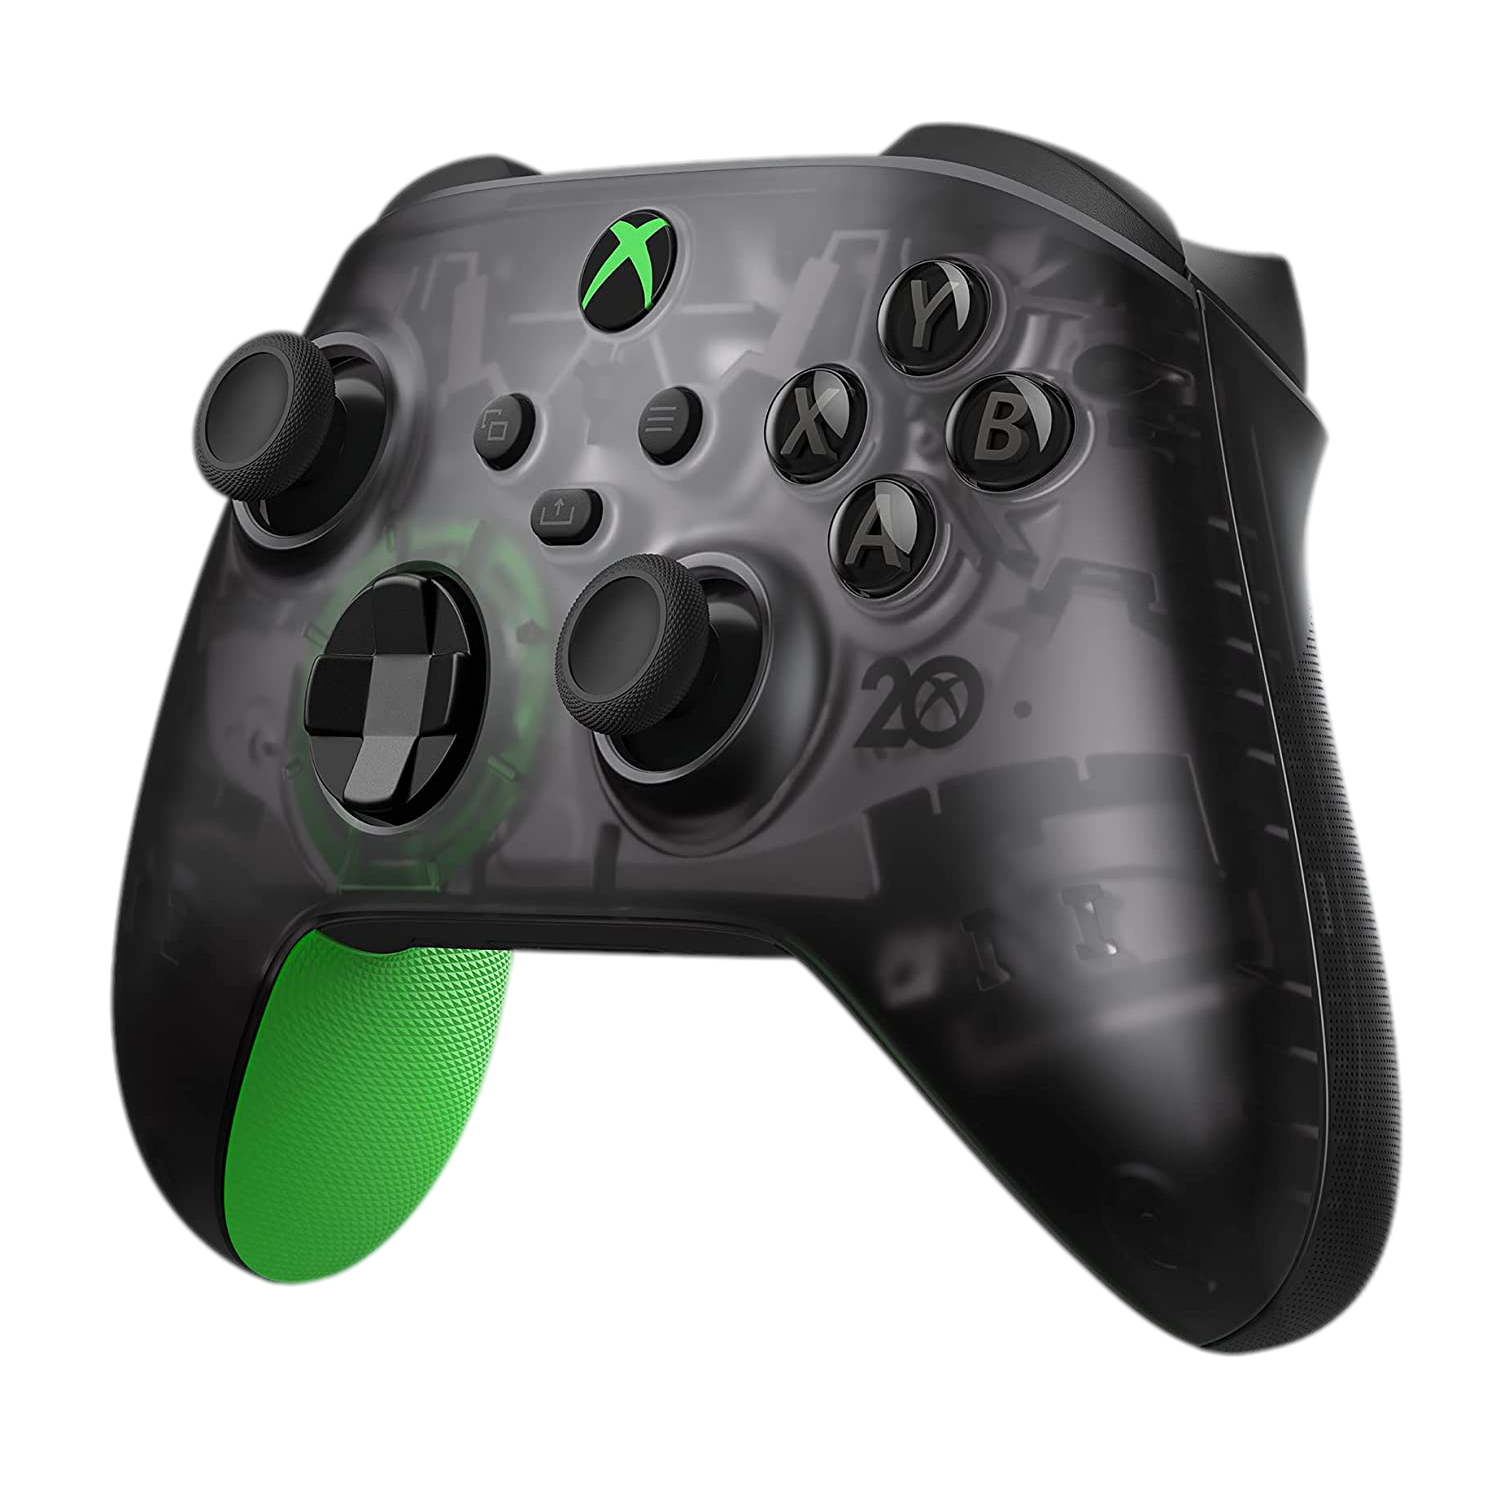 Microsoft-Official-Xbox-Series-Controller-20th-Anniversary-Limited-Edition-12-Months-Warranty-3_c56df467-4919-4131-8971-9ffefebb6245